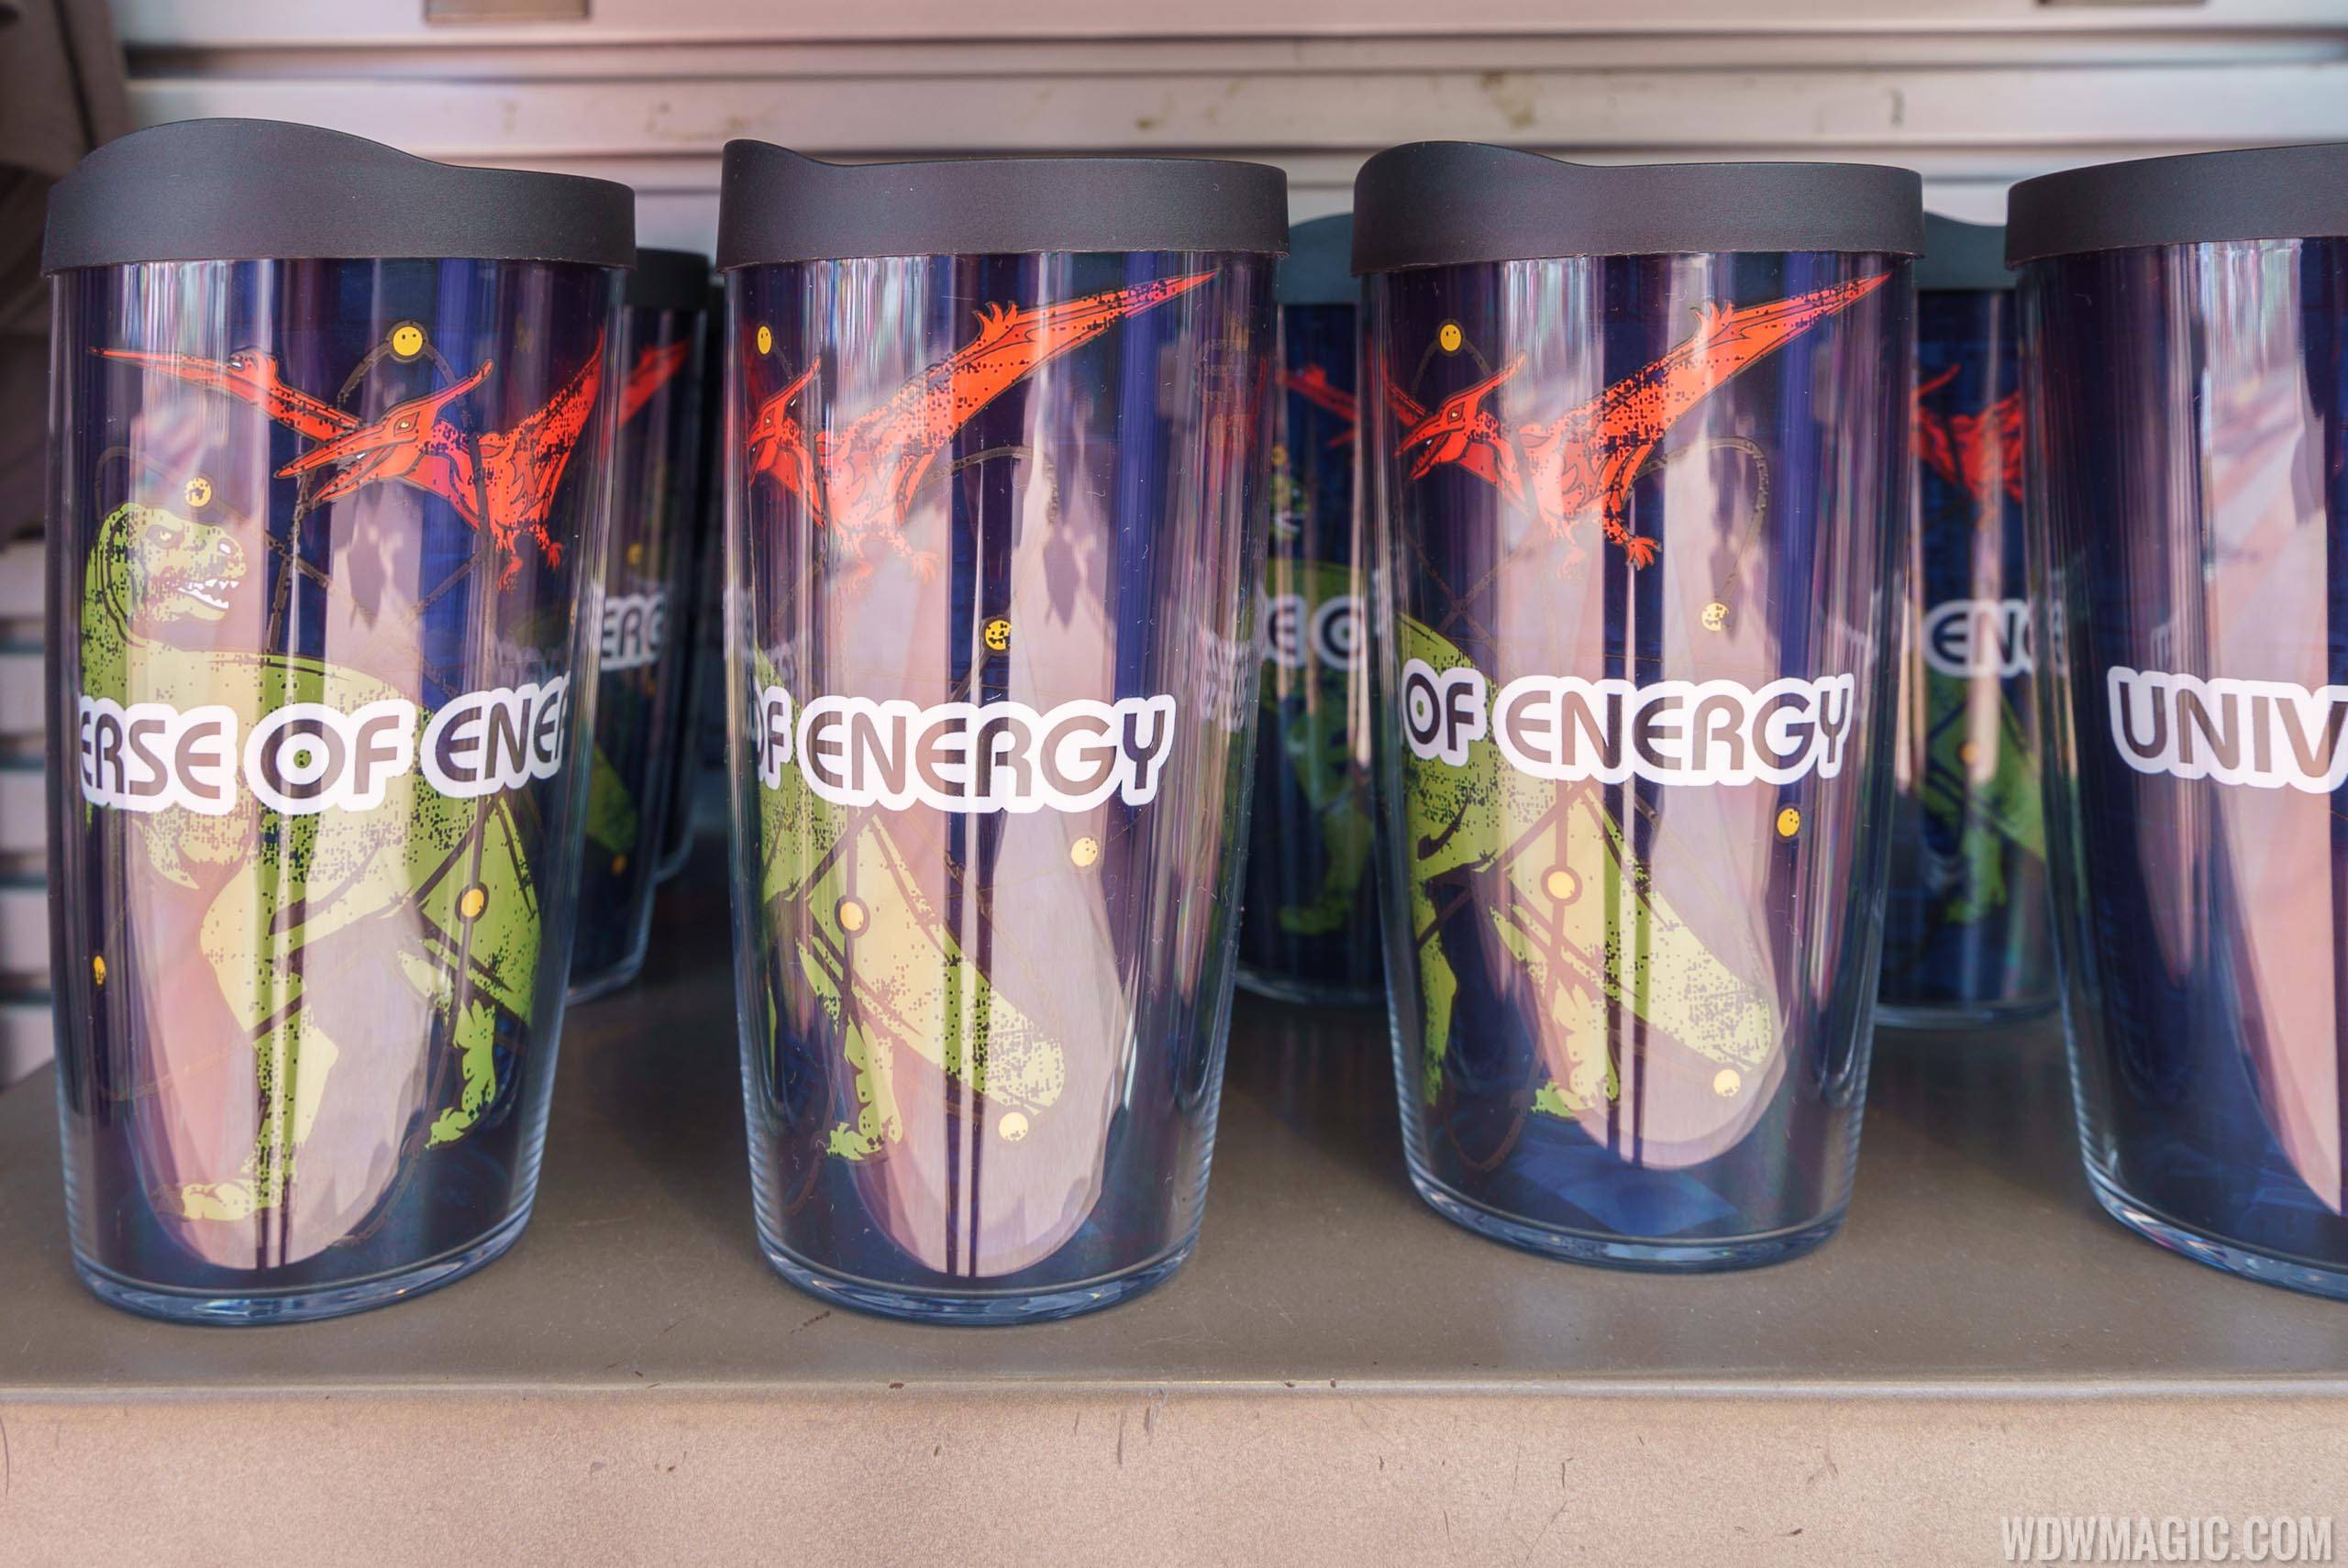 PHOTOS - Closing merchandise for Universe of Energy